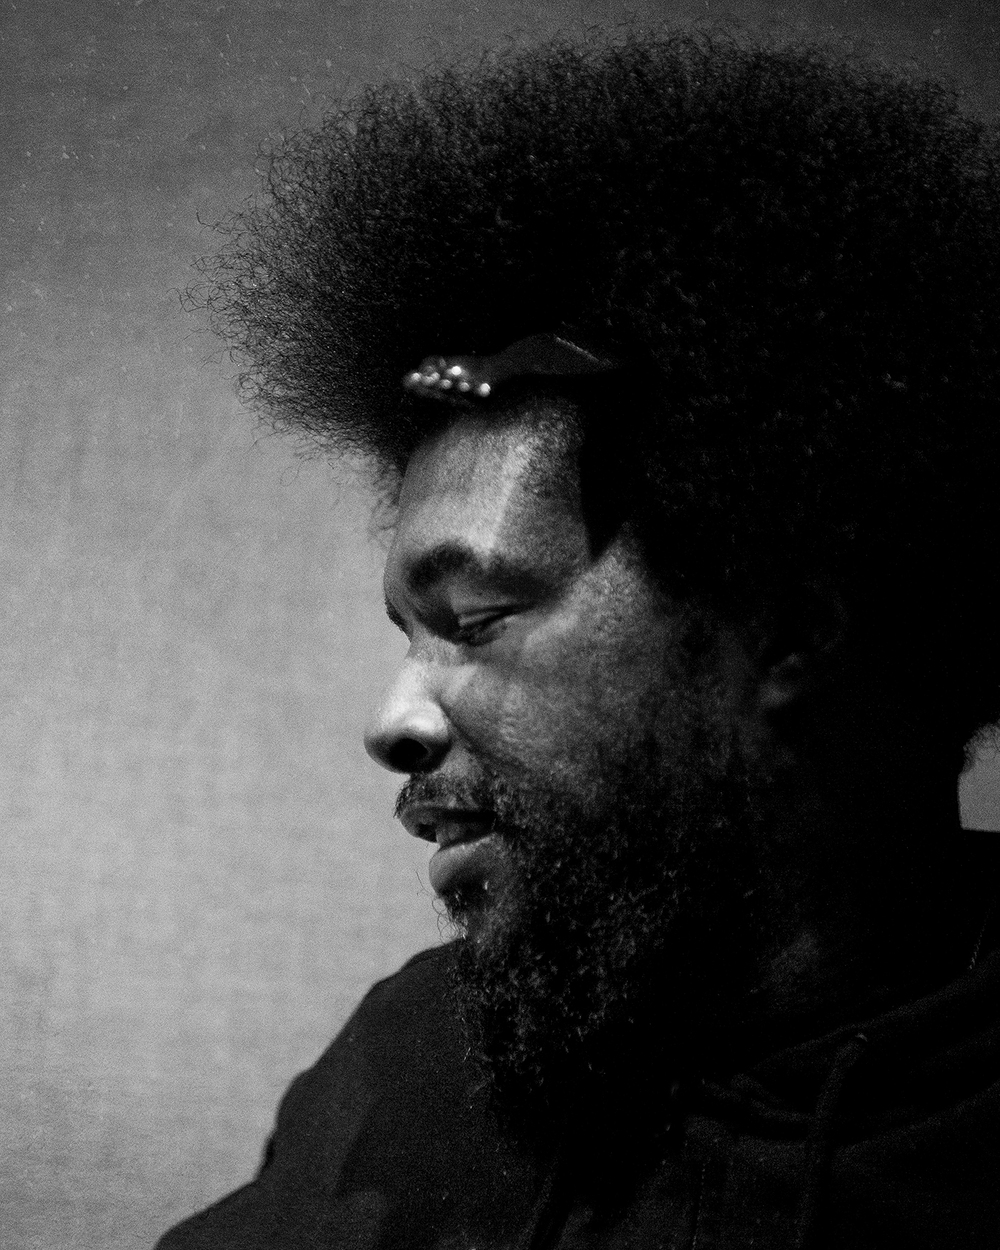 Questlove takes home The Oscar for best documentary "Summer of Soul "